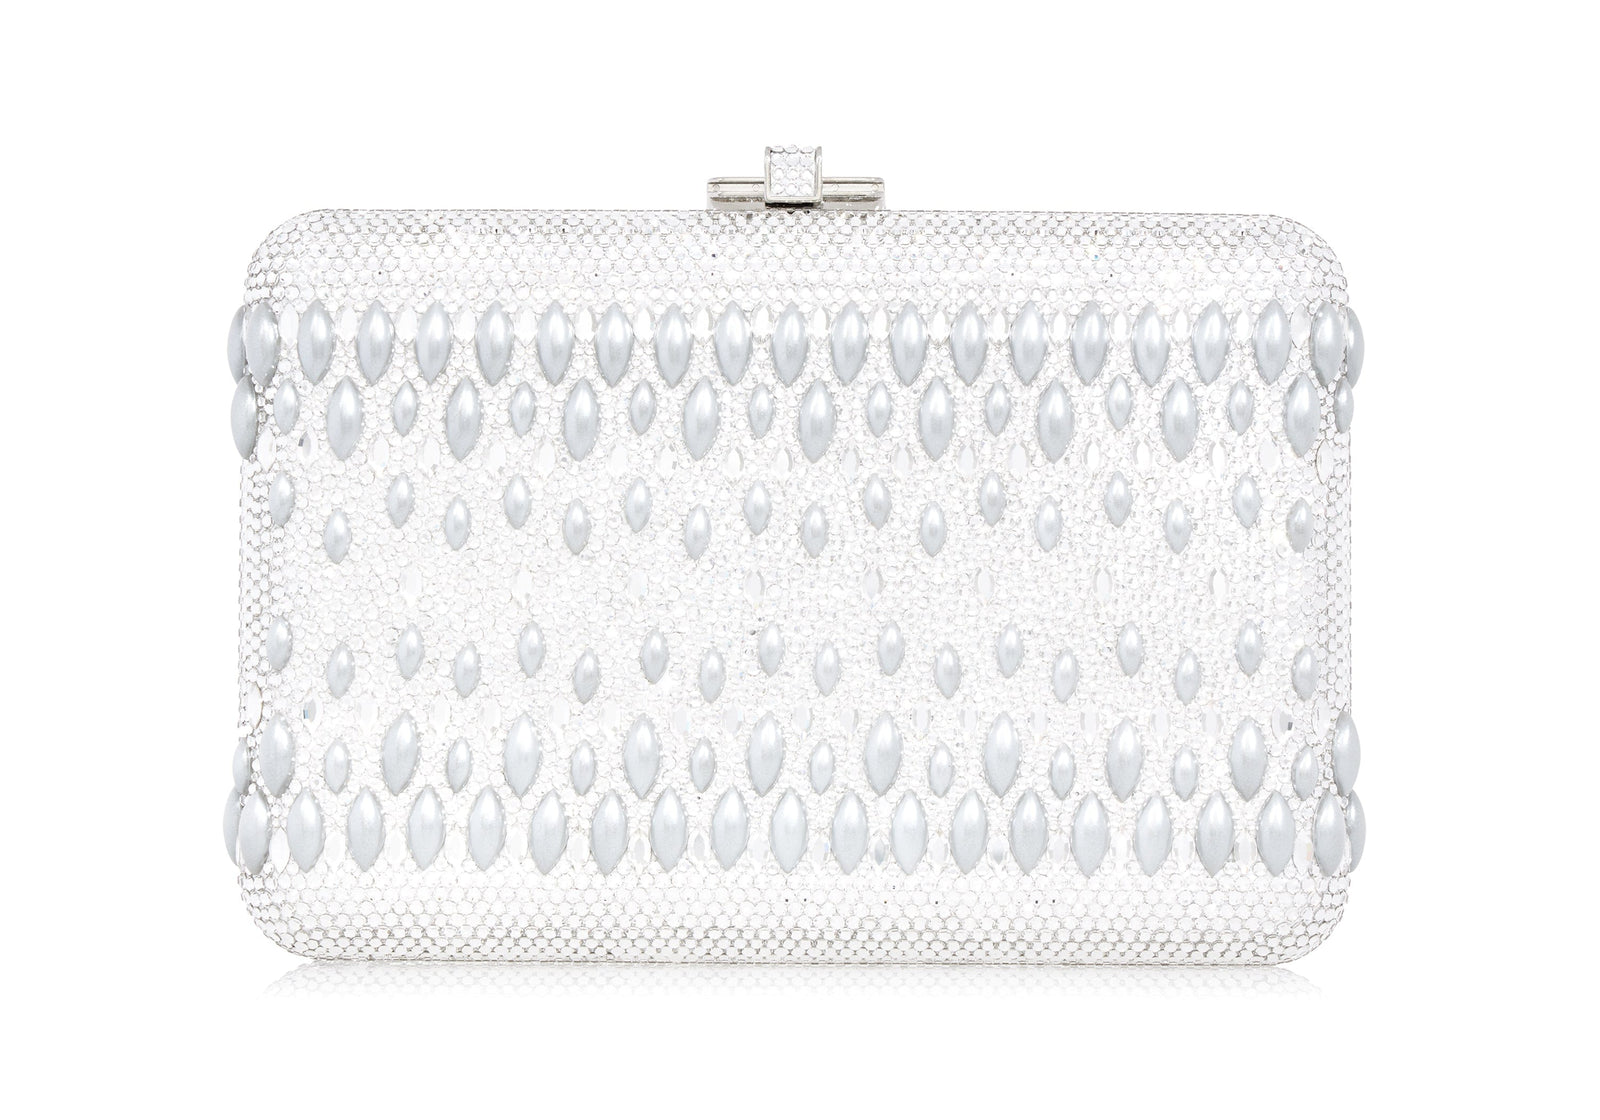 Judith Leiber White Pearl Crystal Women's Clutch Bag!!!PRICE REDUCTION!!!!